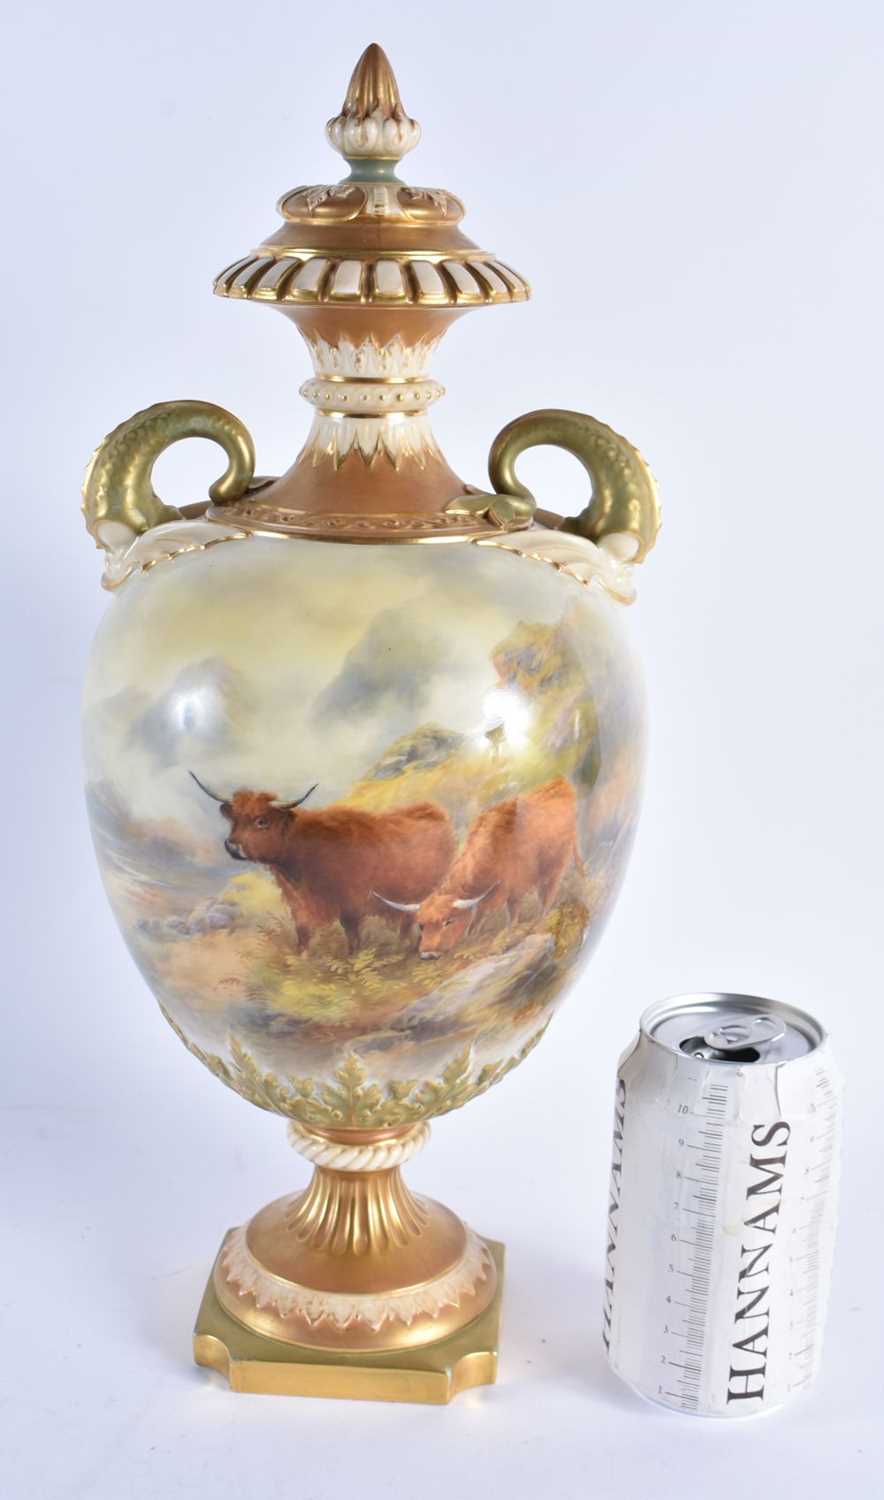 A FINE LARGE ROYAL WORCESTER PORCELAIN TWIN HANDLED VASE AND COVER by John Stinton, painted with two